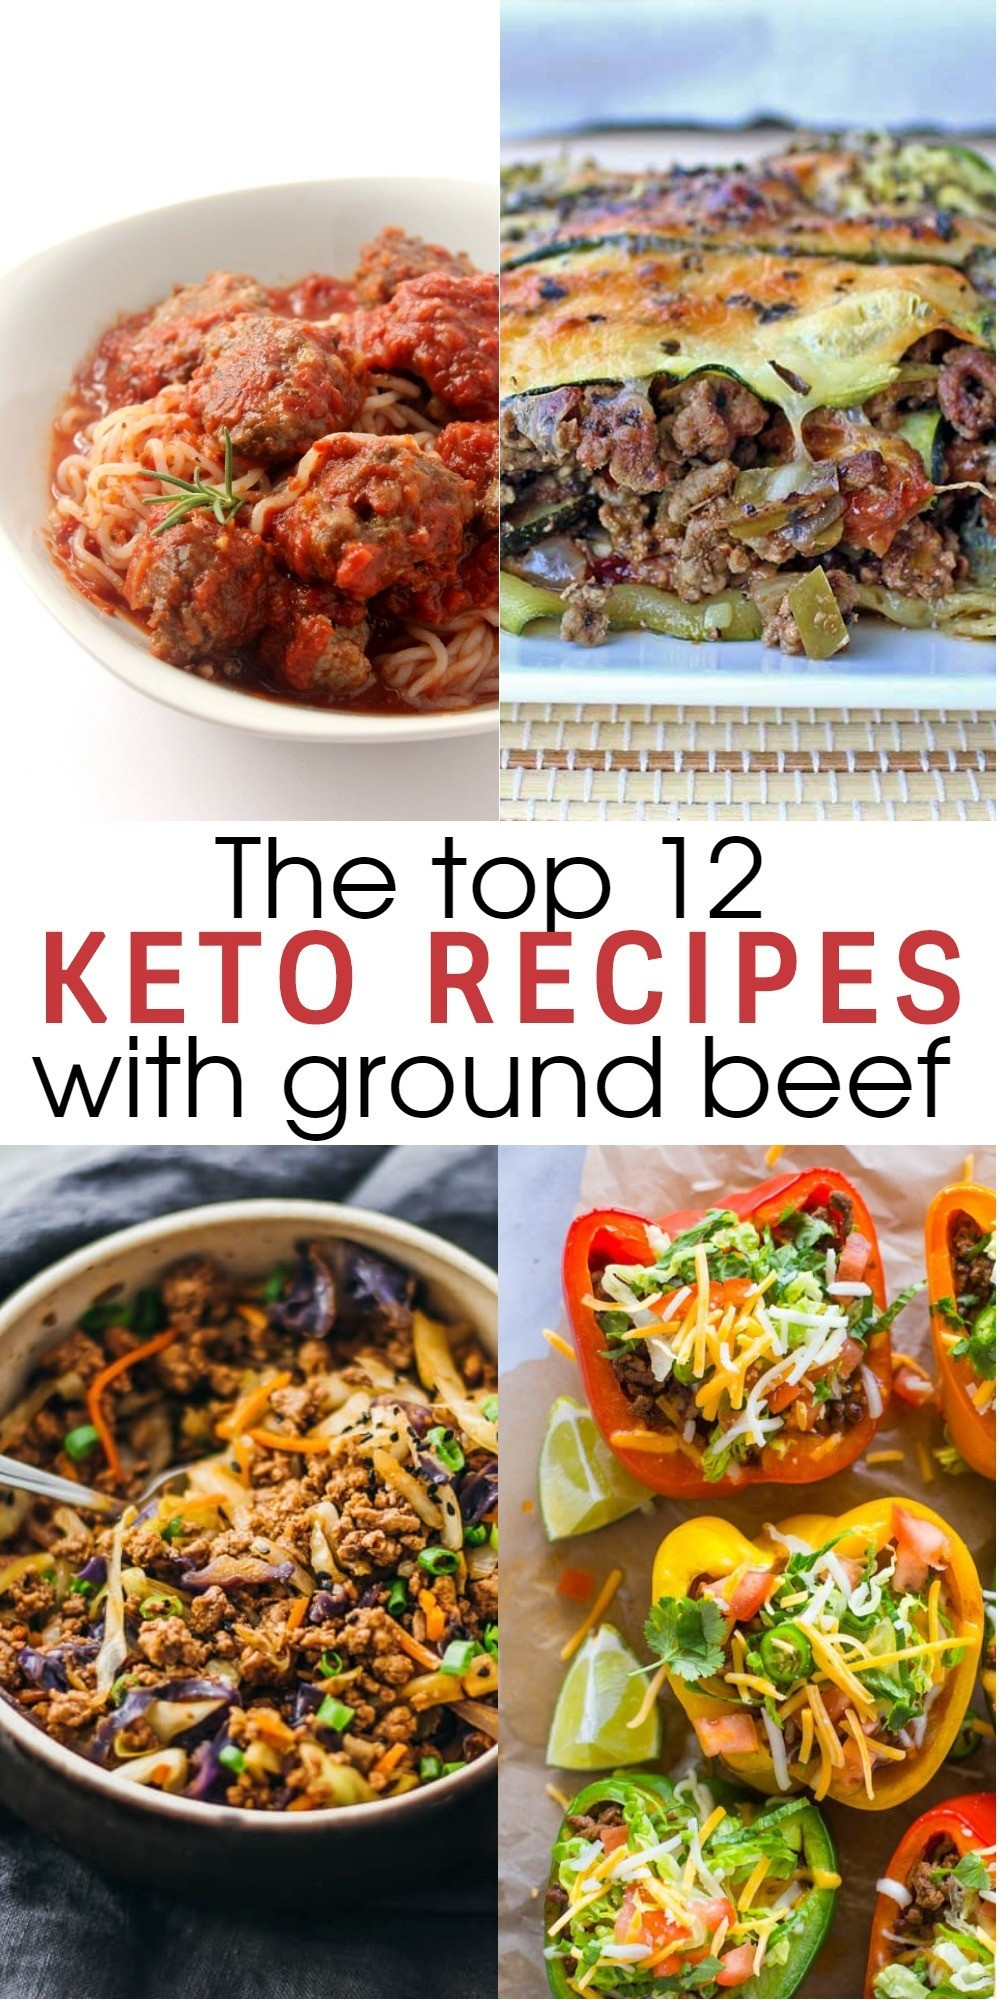 Hamburger Keto Recipes Dinners
 12 Flavorful and Easy Keto Recipes With Ground Beef To Try